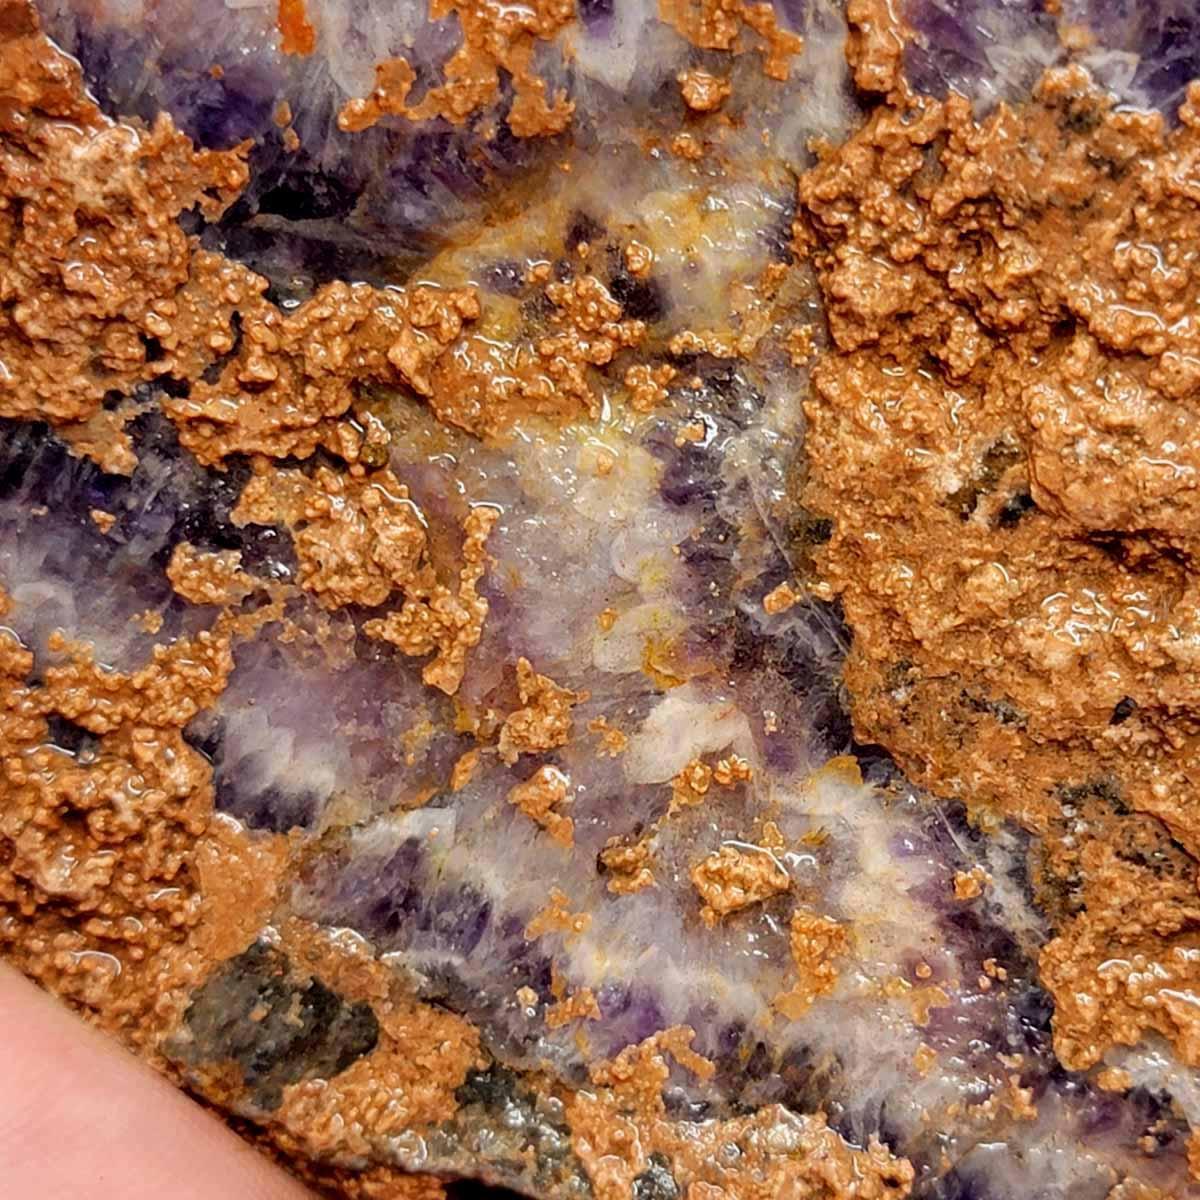 Moroccan Amethyst Lace Rough Chunk! - LapidaryCentral